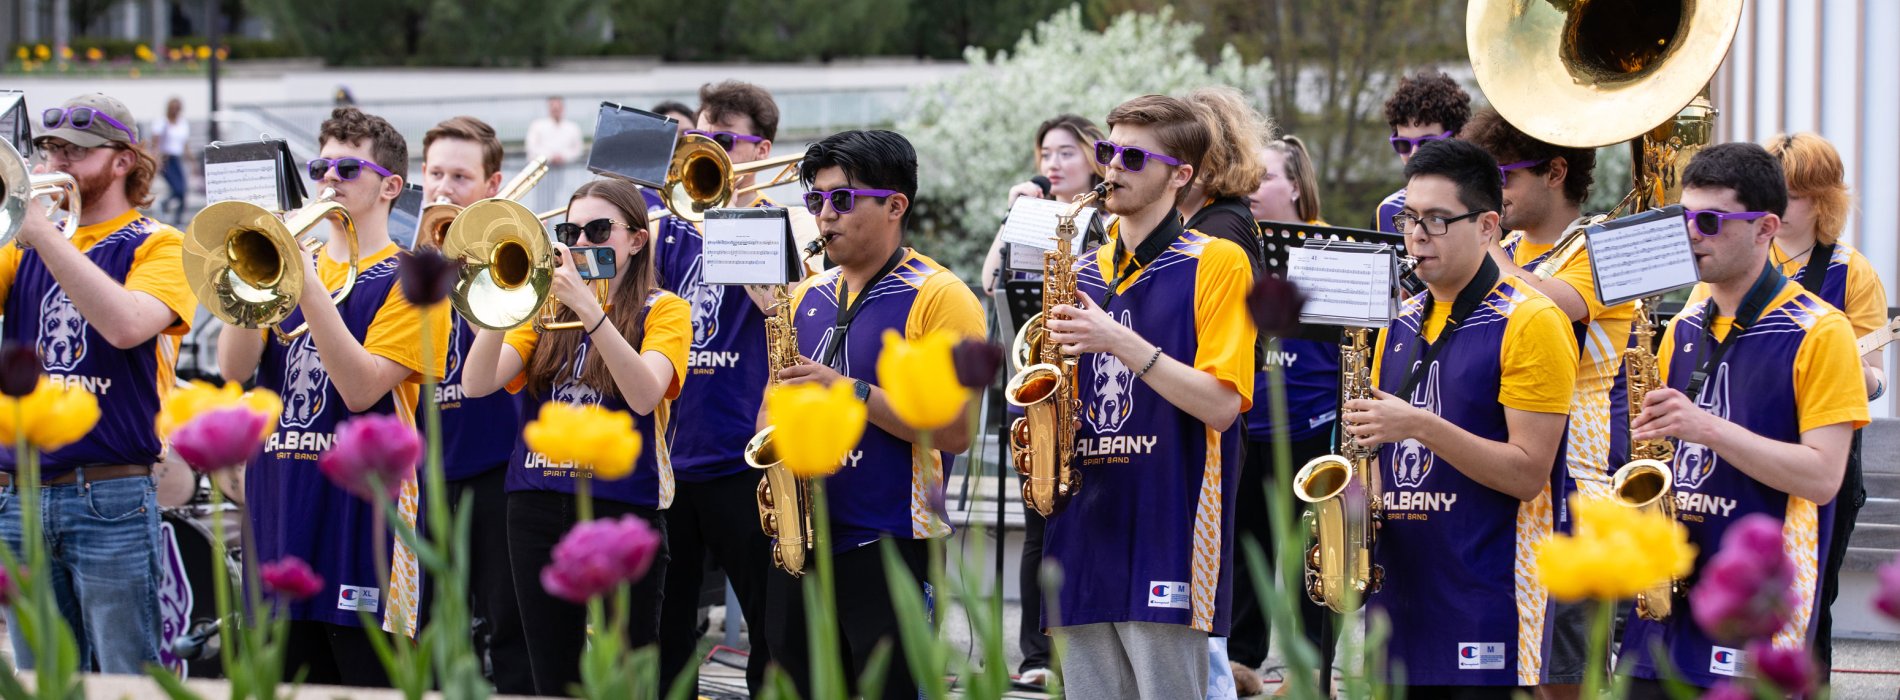 The UAlbany Spirit Band performs outdoors on the Uptown Campus.